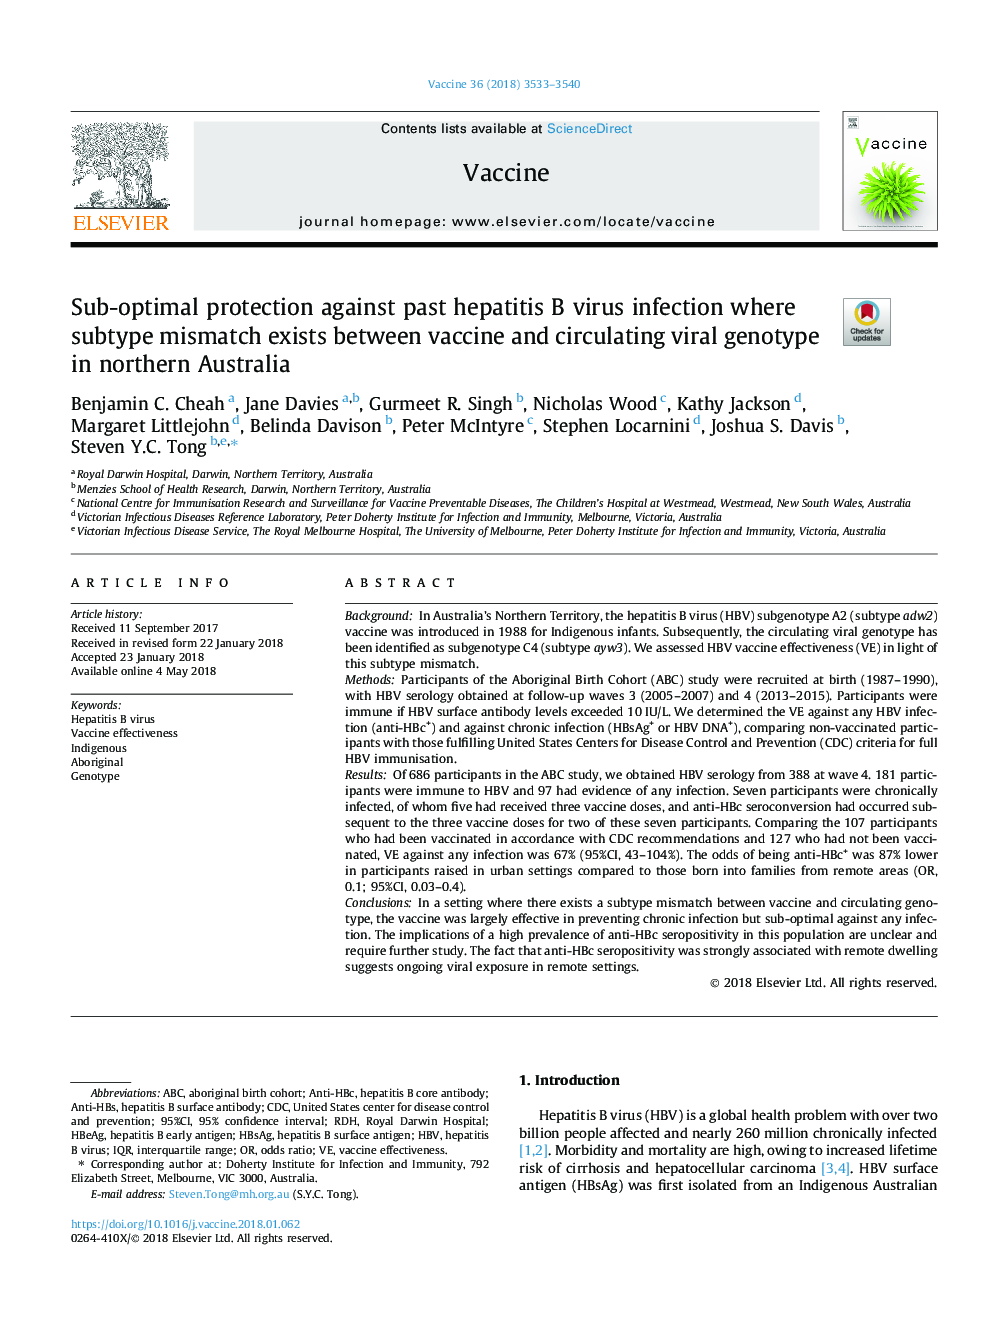 Sub-optimal protection against past hepatitis B virus infection where subtype mismatch exists between vaccine and circulating viral genotype in northern Australia